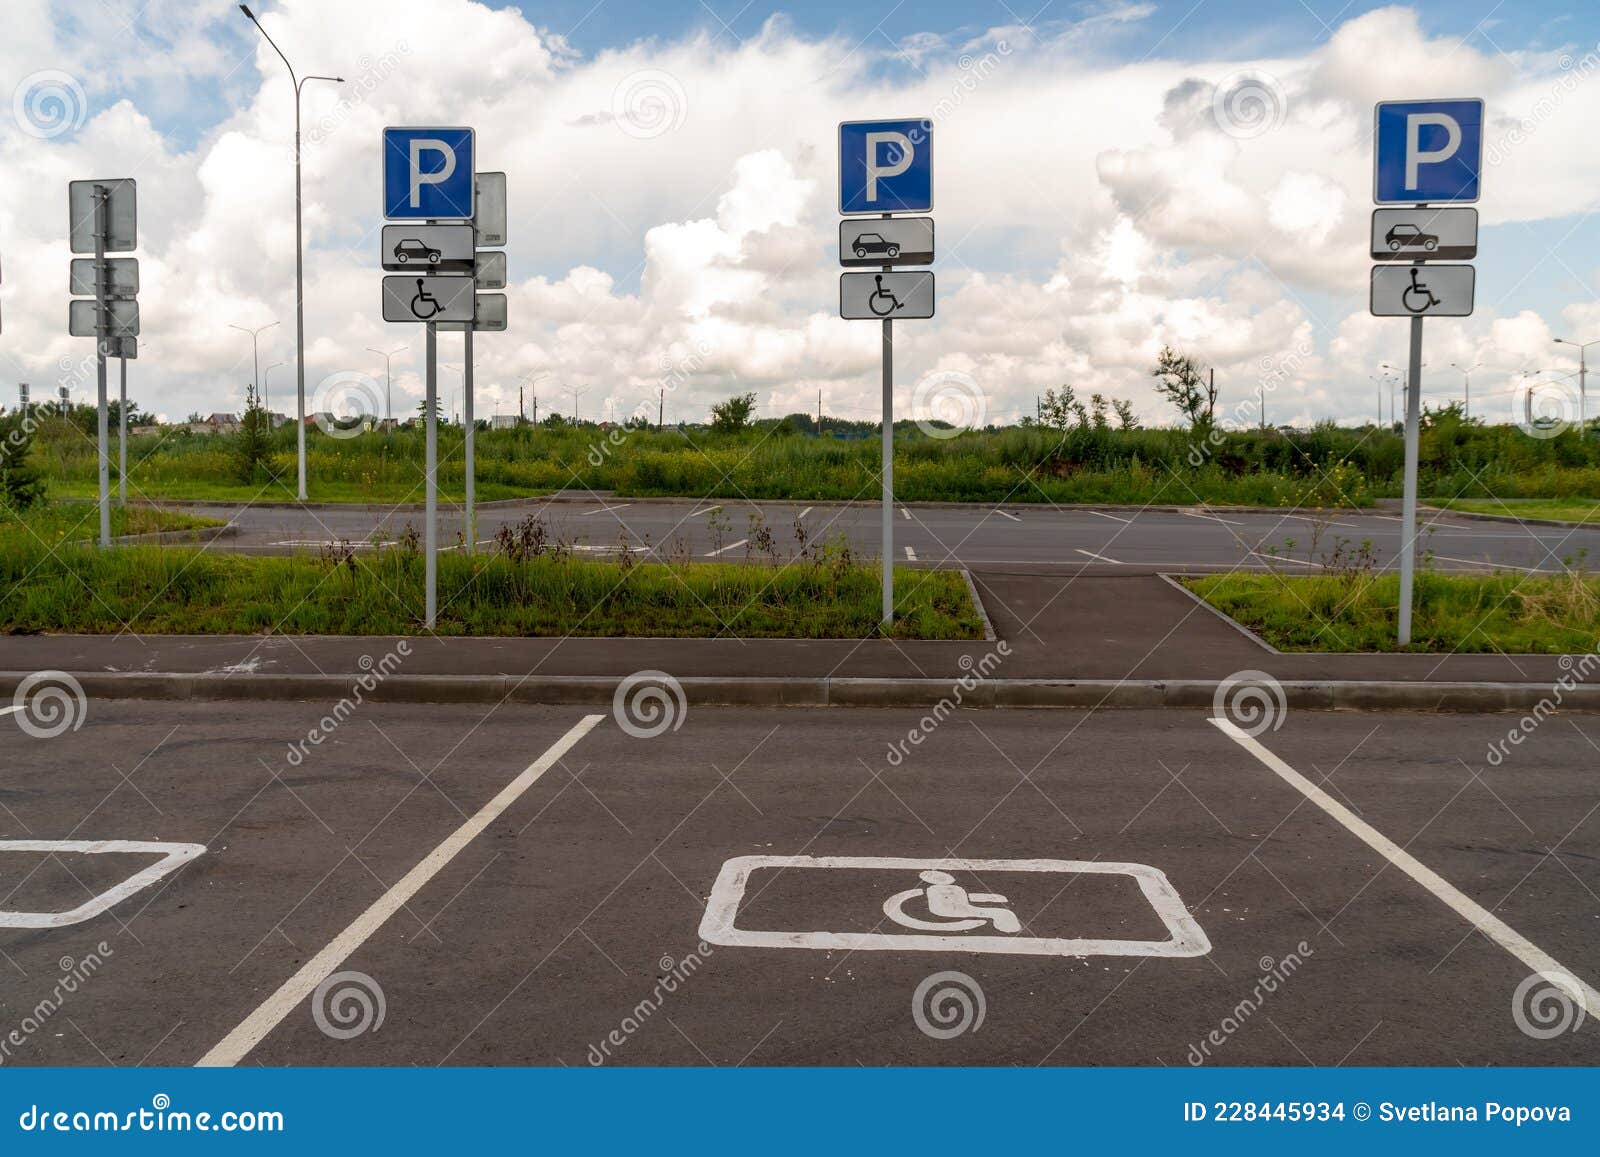 parking spaces for disabled people with road signs, demarcated on the asphalt